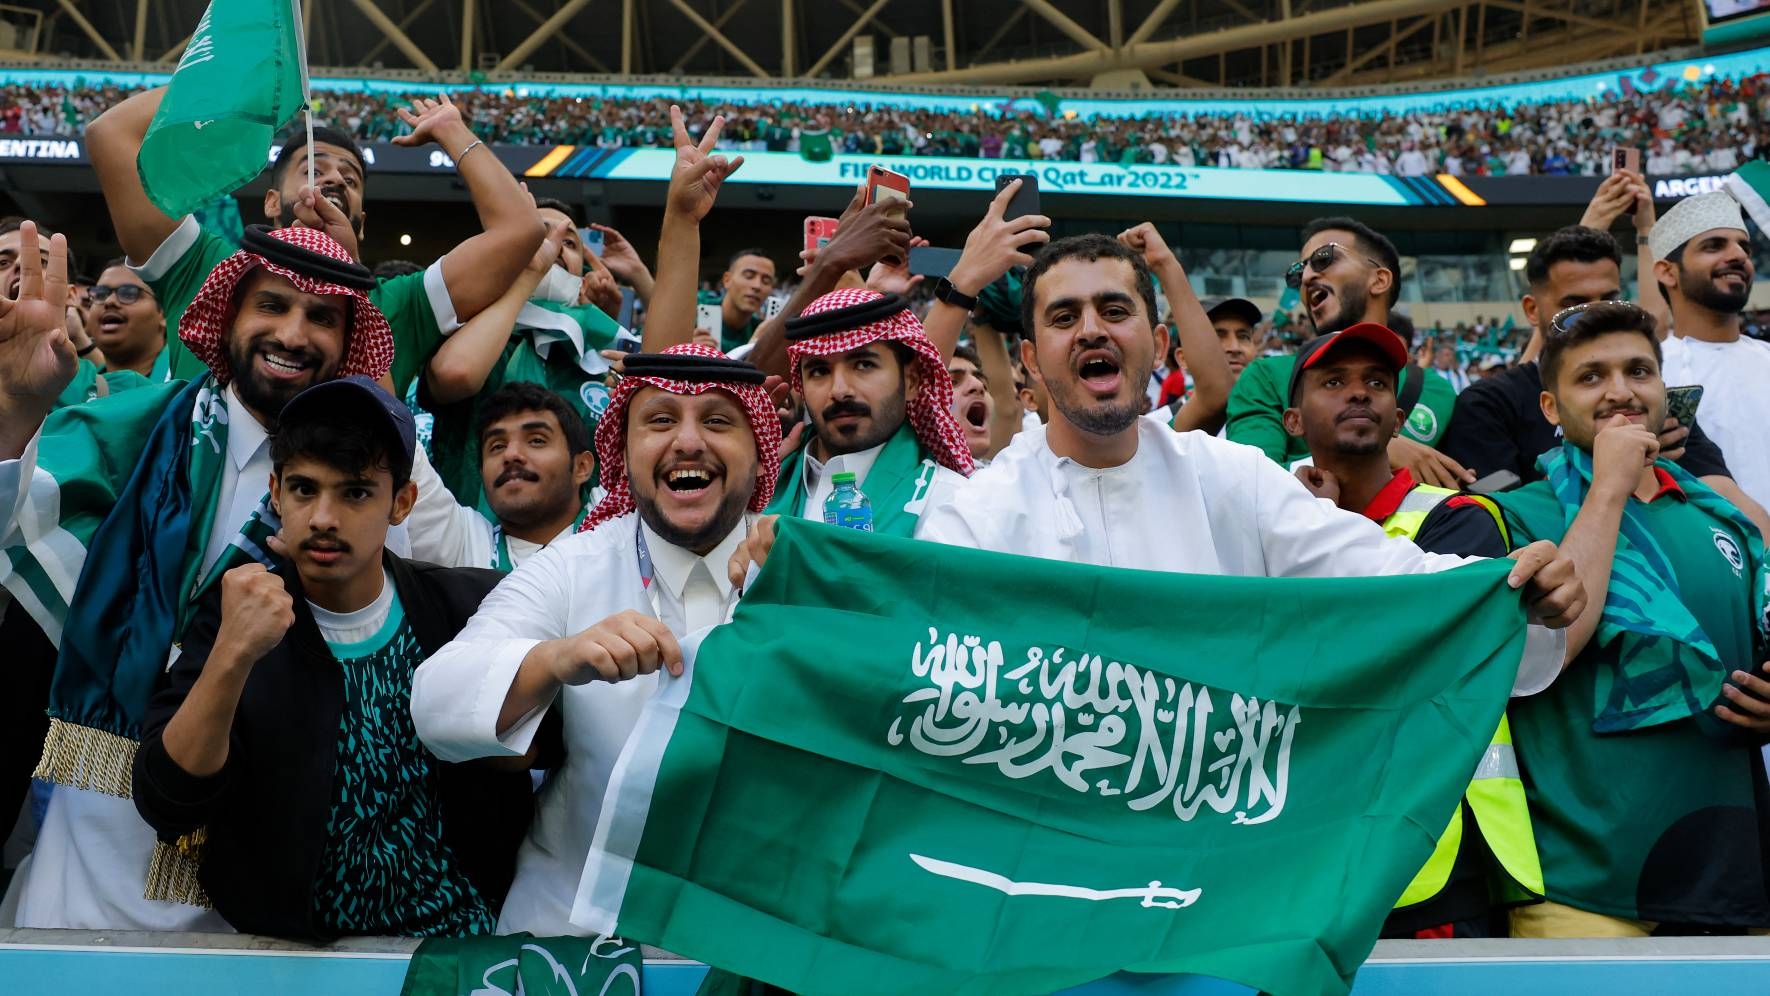 Saudi Arabia fans celebrate their team's victory over Argentina 2-1 during the Qatar 2022 World Cup football at Lusail Stadium, 22 November 2022 (AFP)